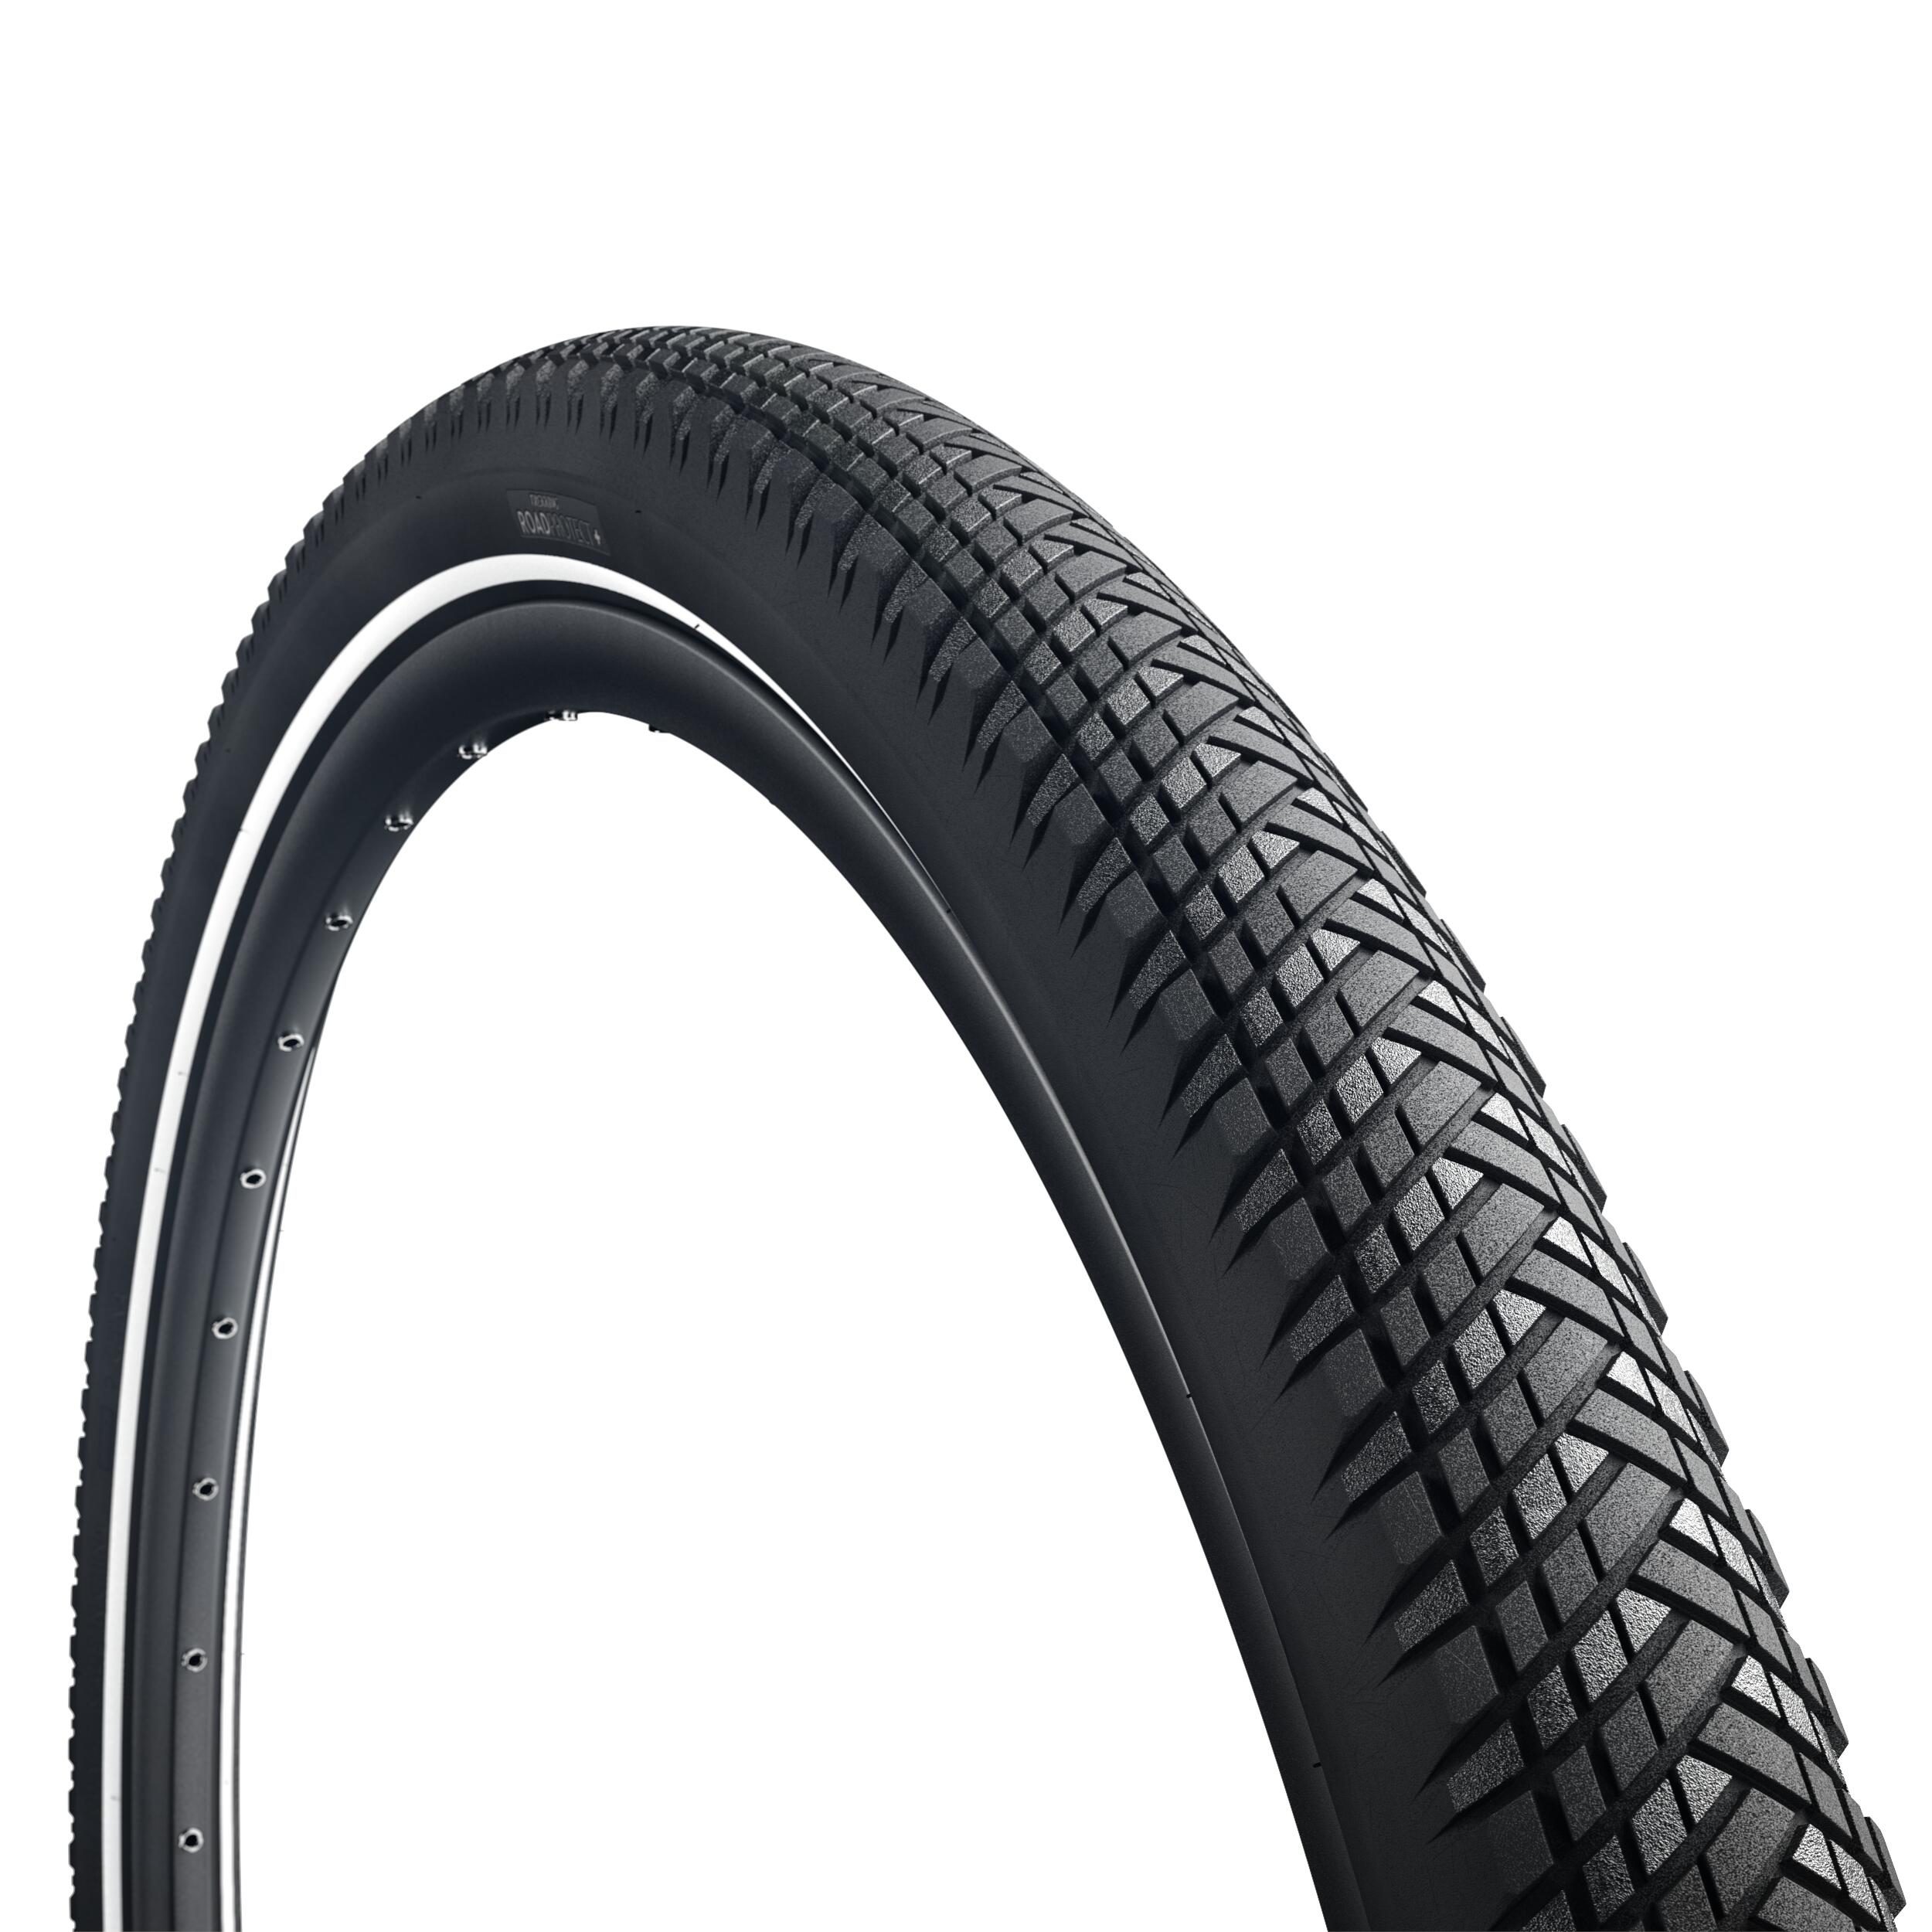 RIVERSIDE Puncture-Proof Hybrid Electric Bike Tyre RoadProtect+ 700 x 47 mm